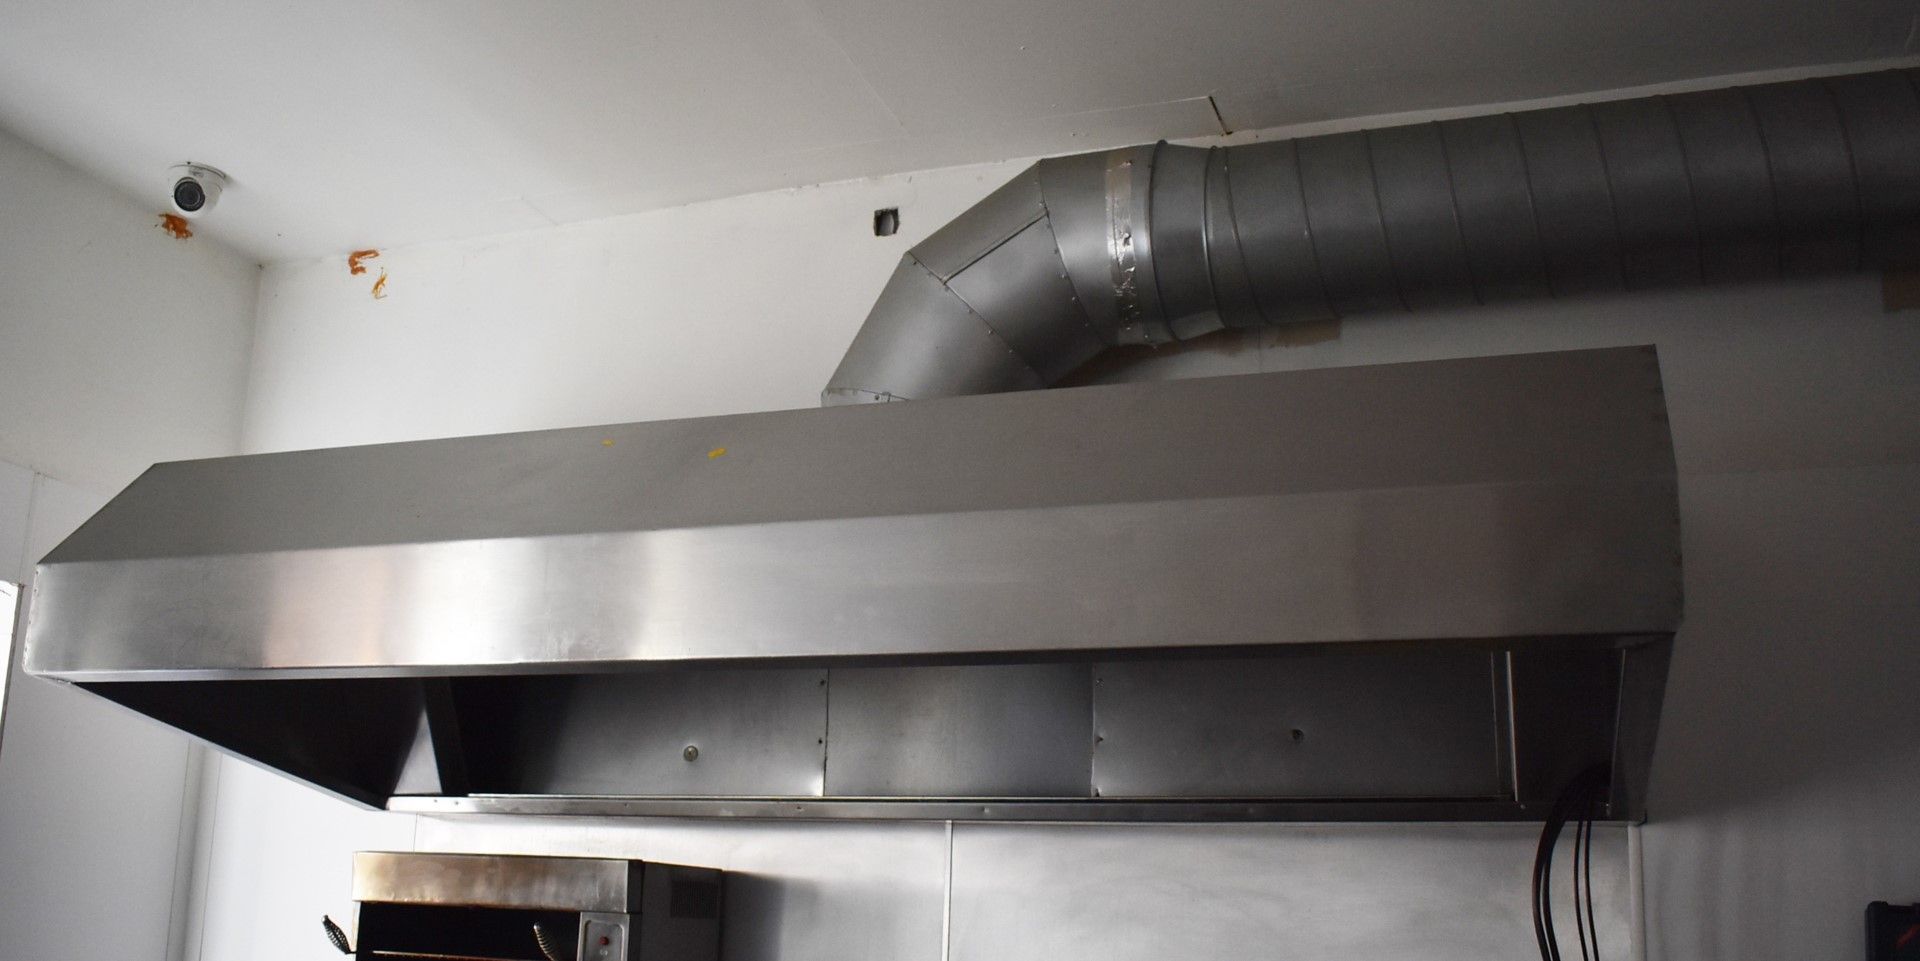 1 x Commercial Kitchen Extractor Canopy - Filters Not Included - Size 240 x 107 cms - CL586 - - Image 2 of 2